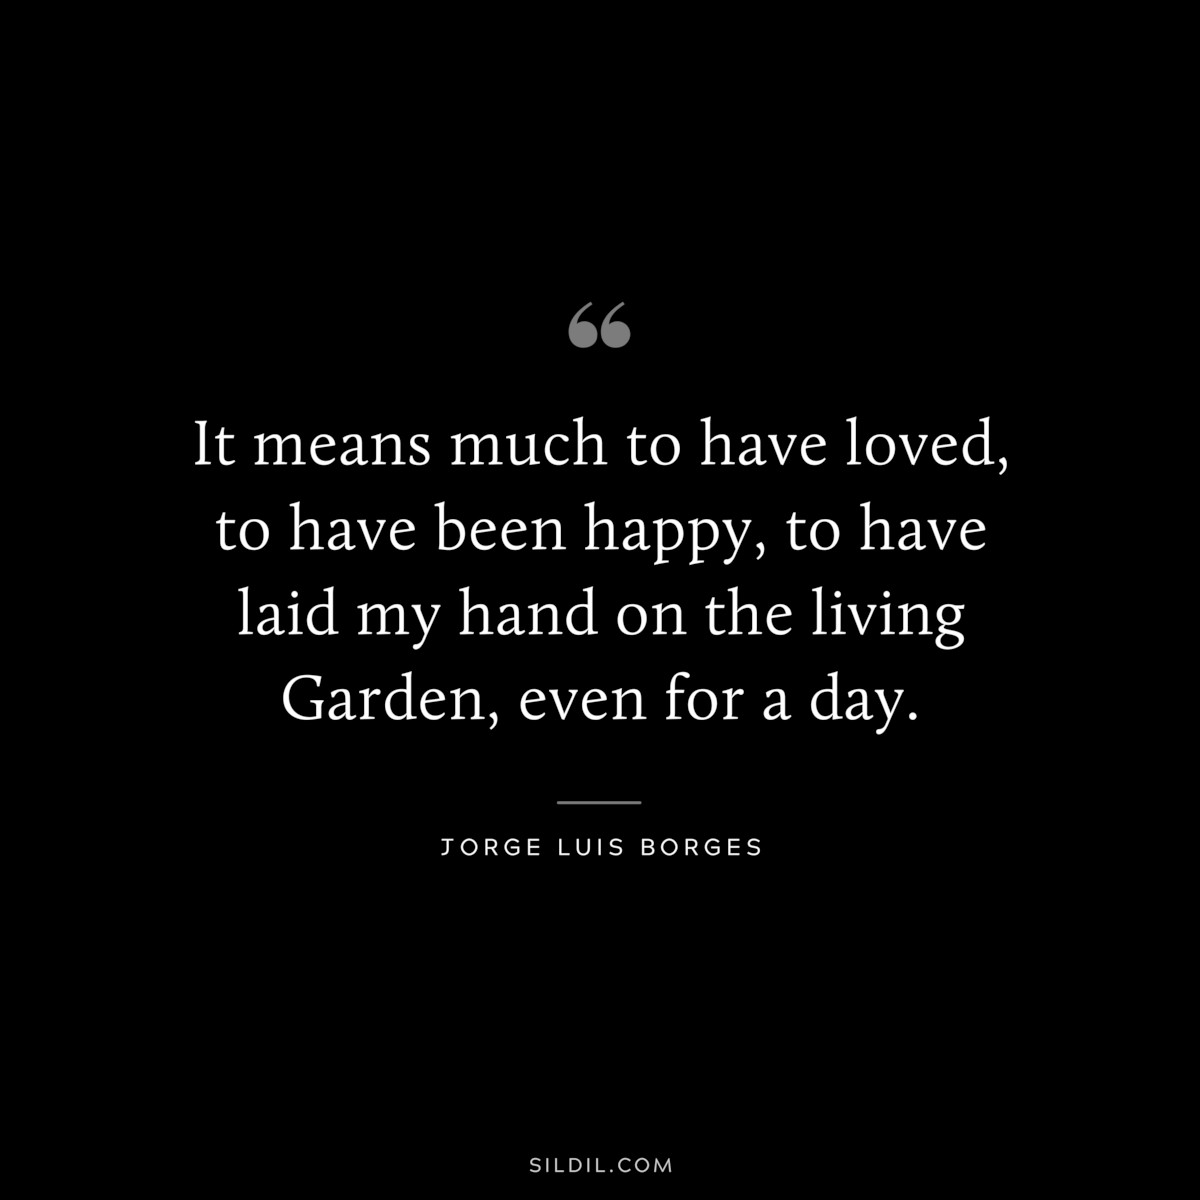 It means much to have loved, to have been happy, to have laid my hand on the living Garden, even for a day. ― Jorge Luis Borges